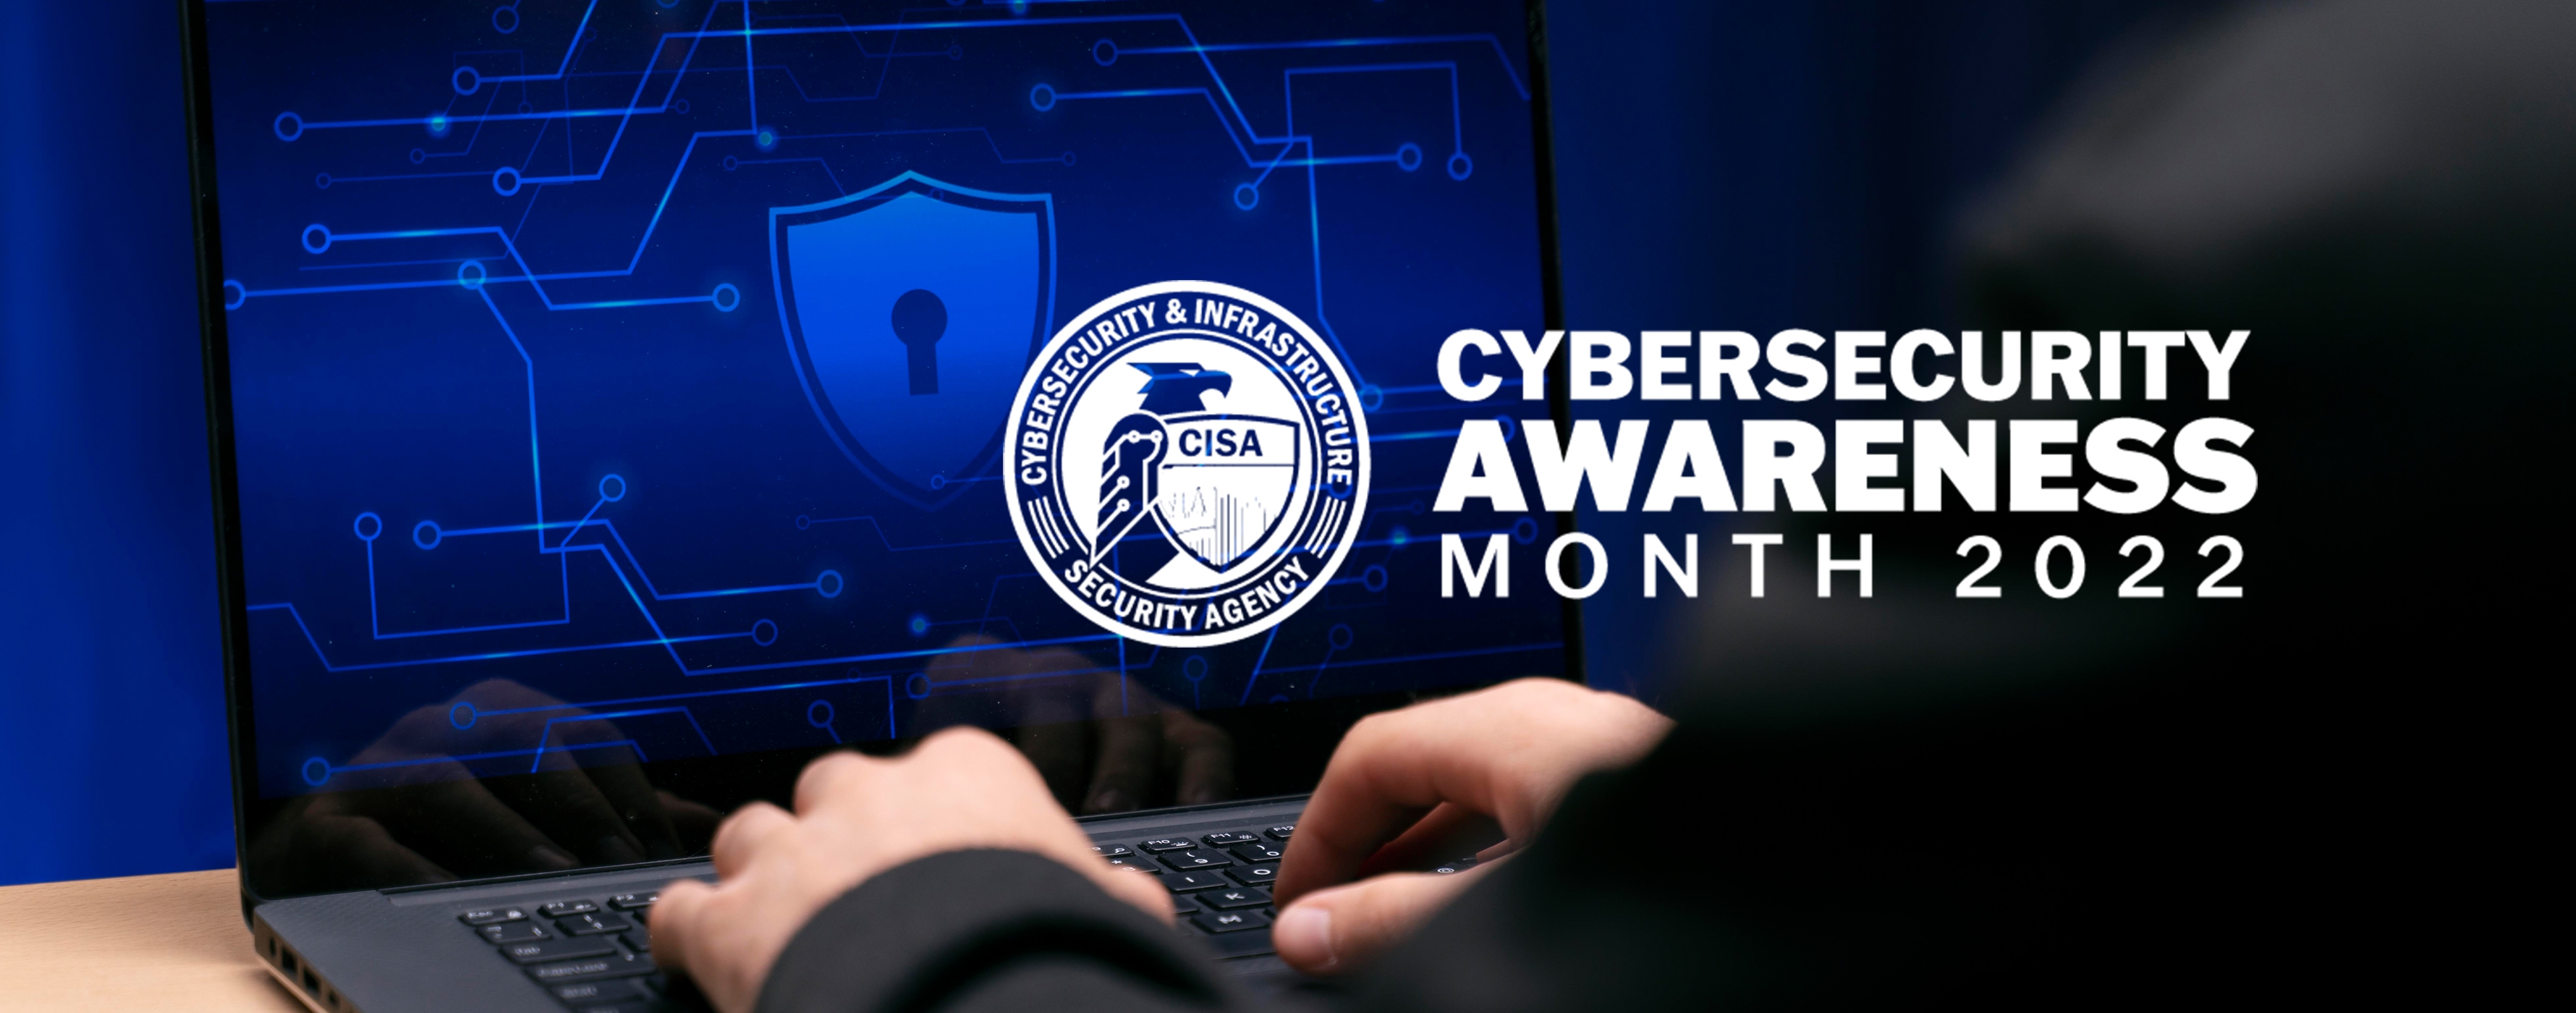 Cybersecurity Awareness Month: A Dozen Tips to Stay Cyber Secure